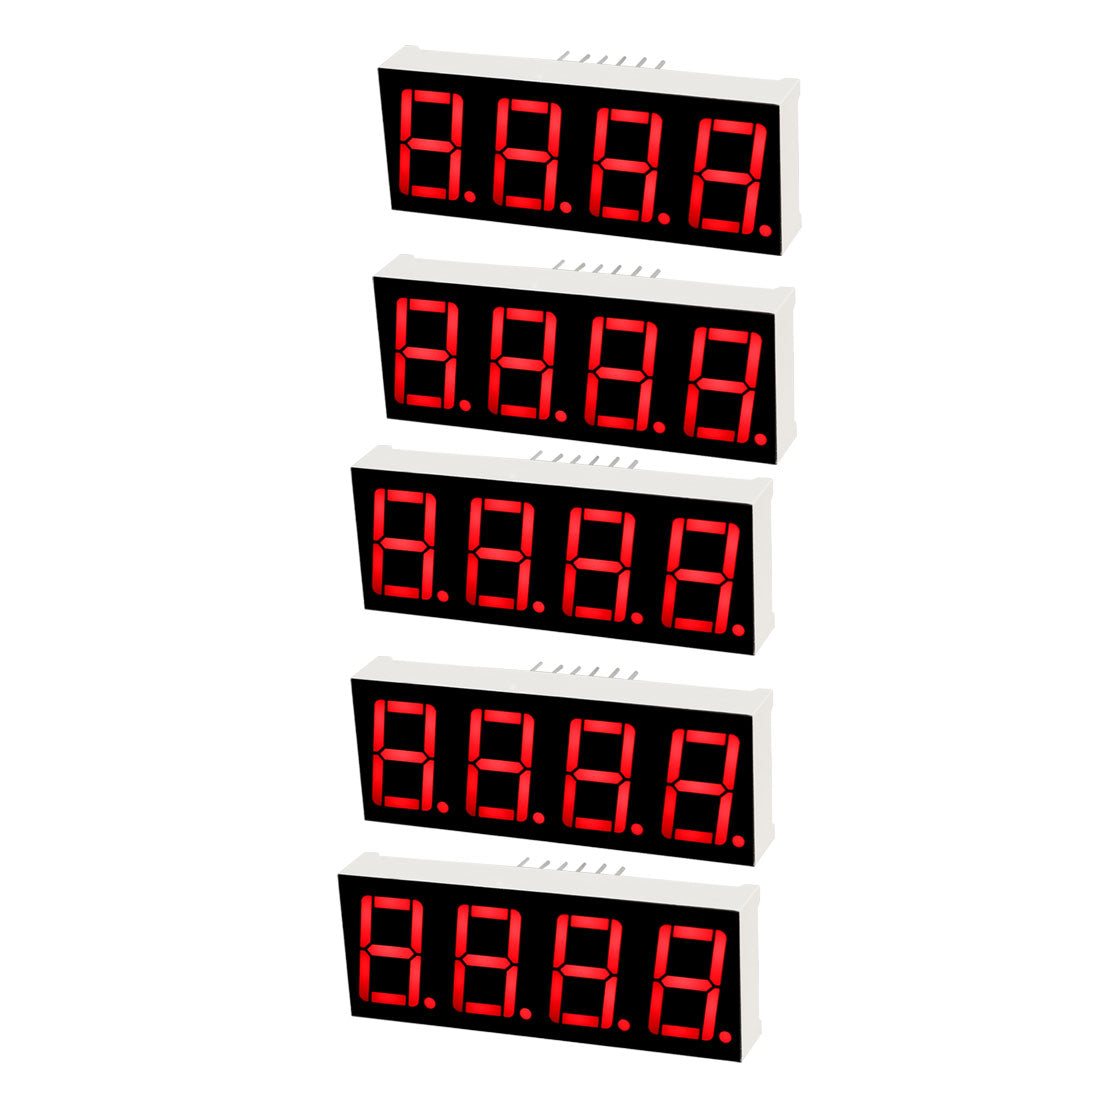 uxcell Uxcell Common Cathode 12Pin 4 Bit 7 Segment 1.98 x 0.75 x 0.31 Inch 0.55" Red LED Display Digital Tube 5pcs